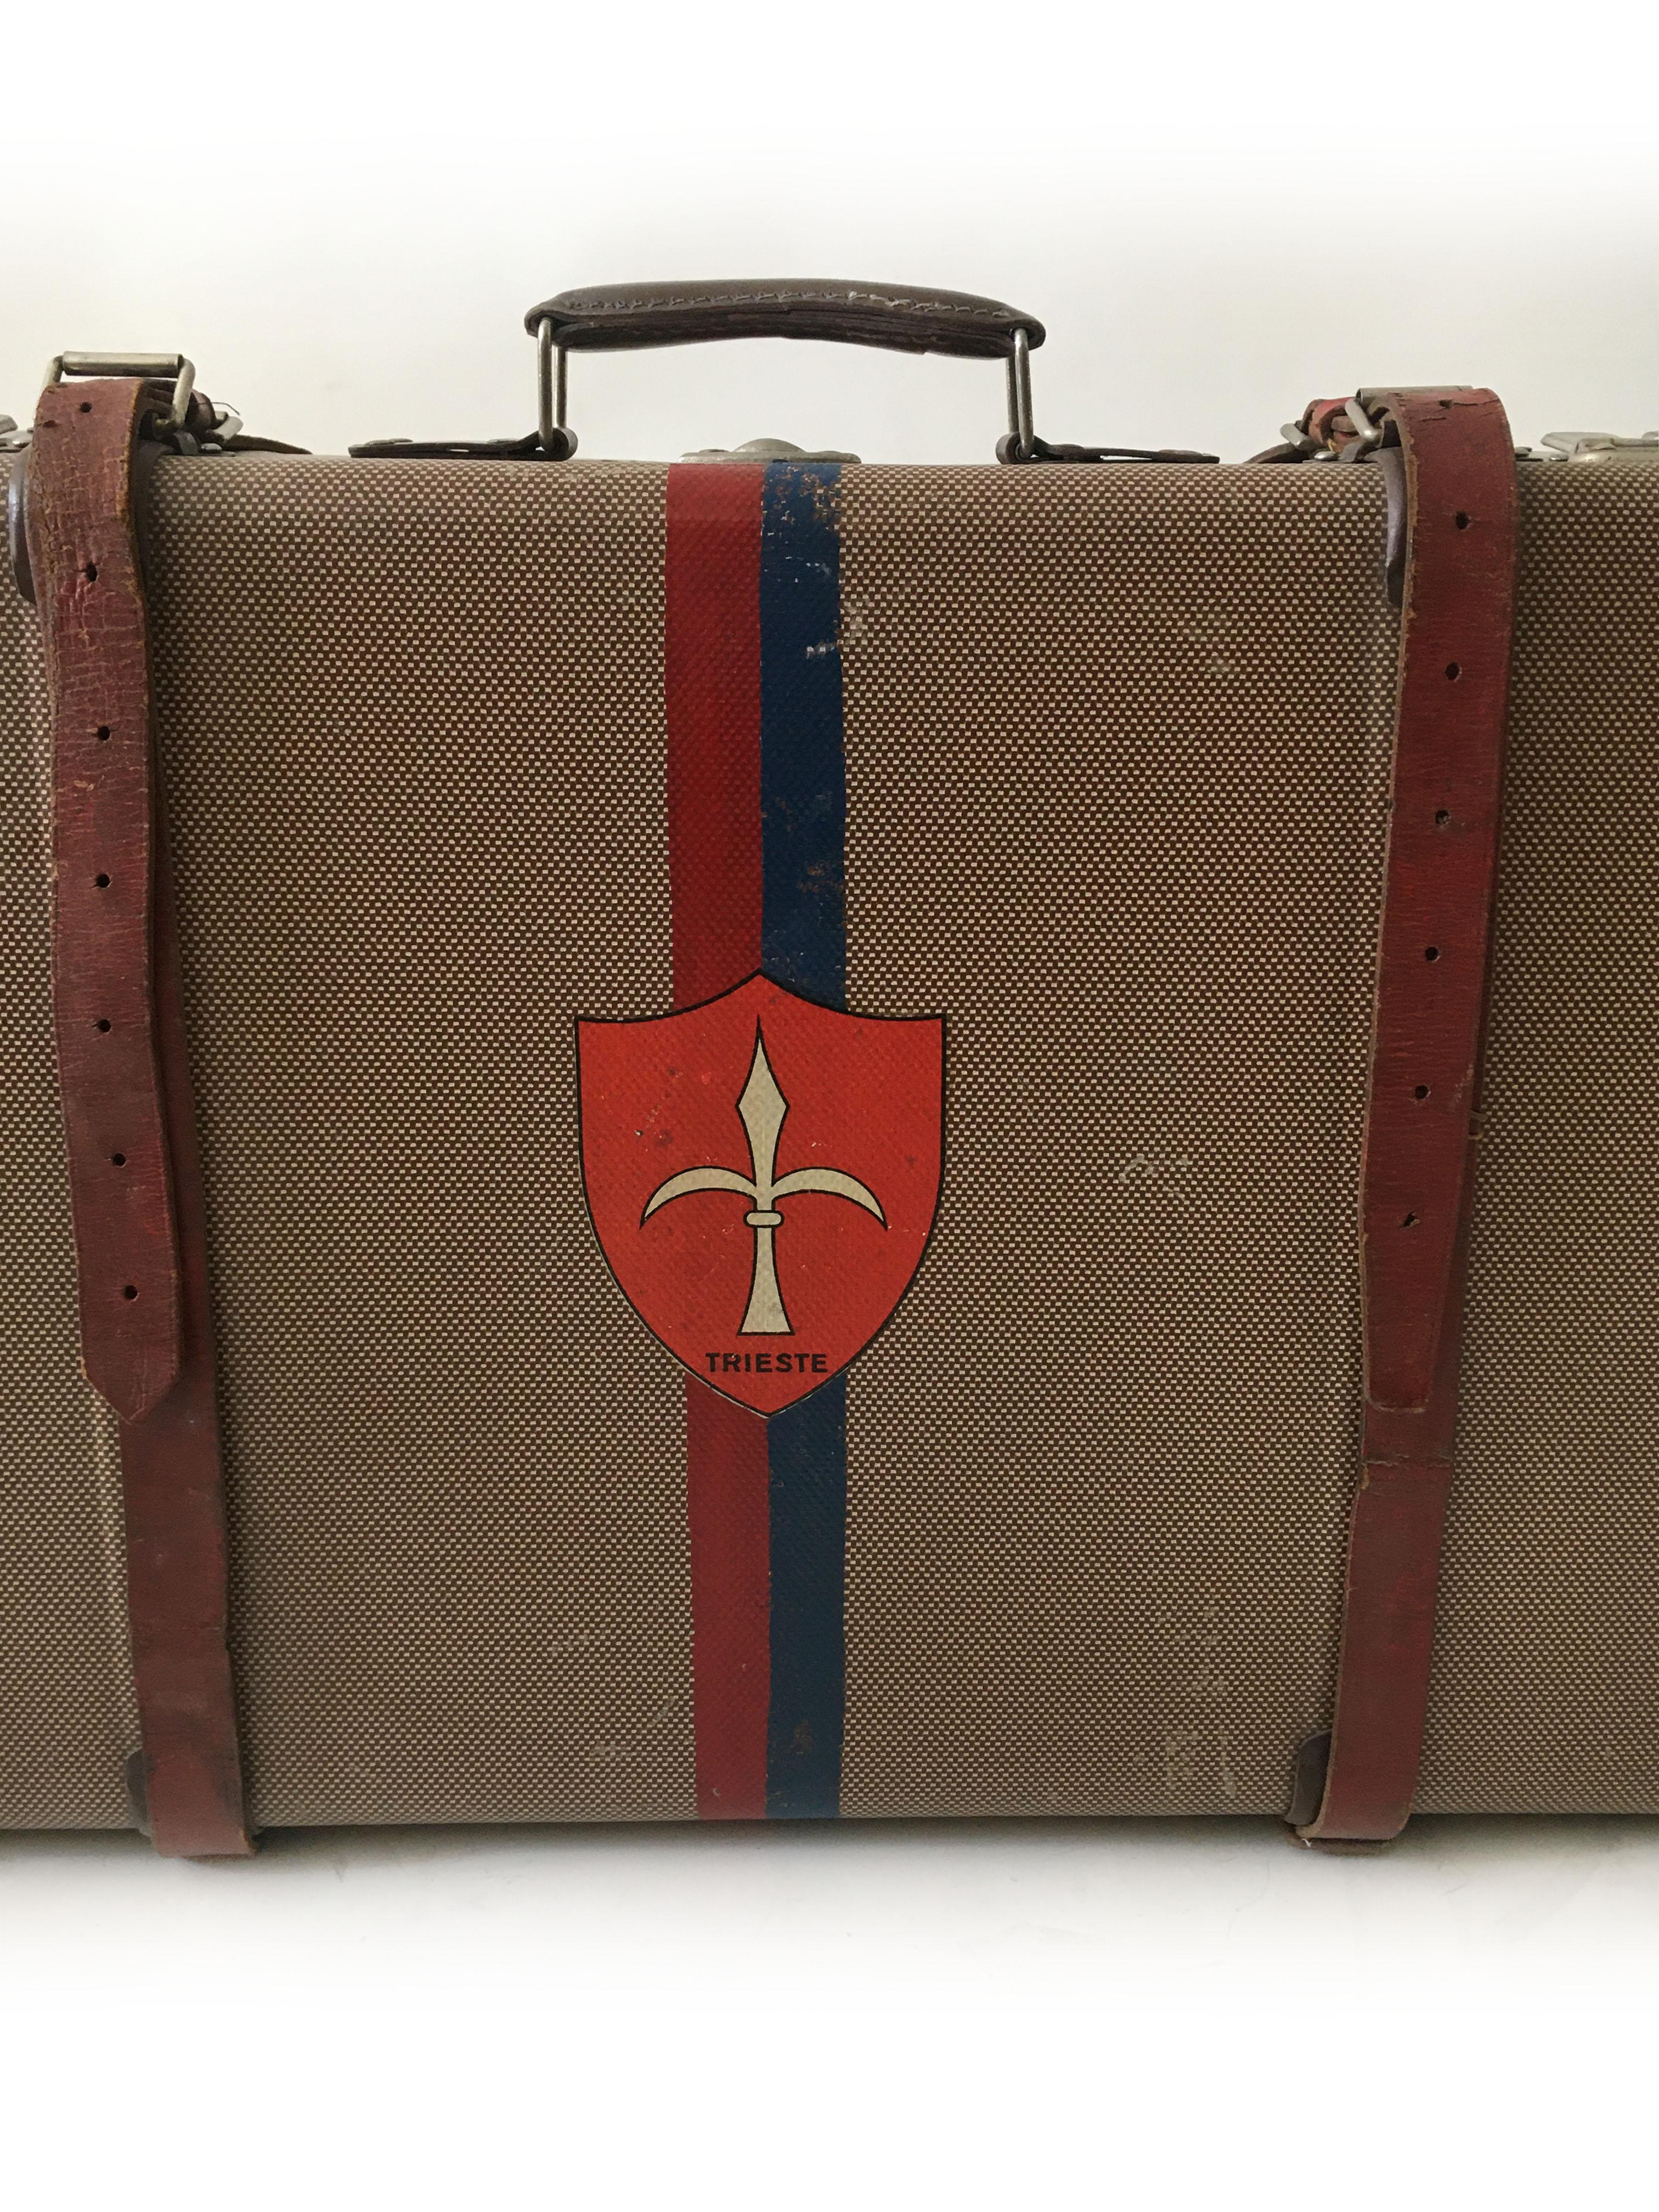 Art Deco Adler Koffer Luggage with Painted Coat of Arms, Crest of Trieste, Austria 1930s